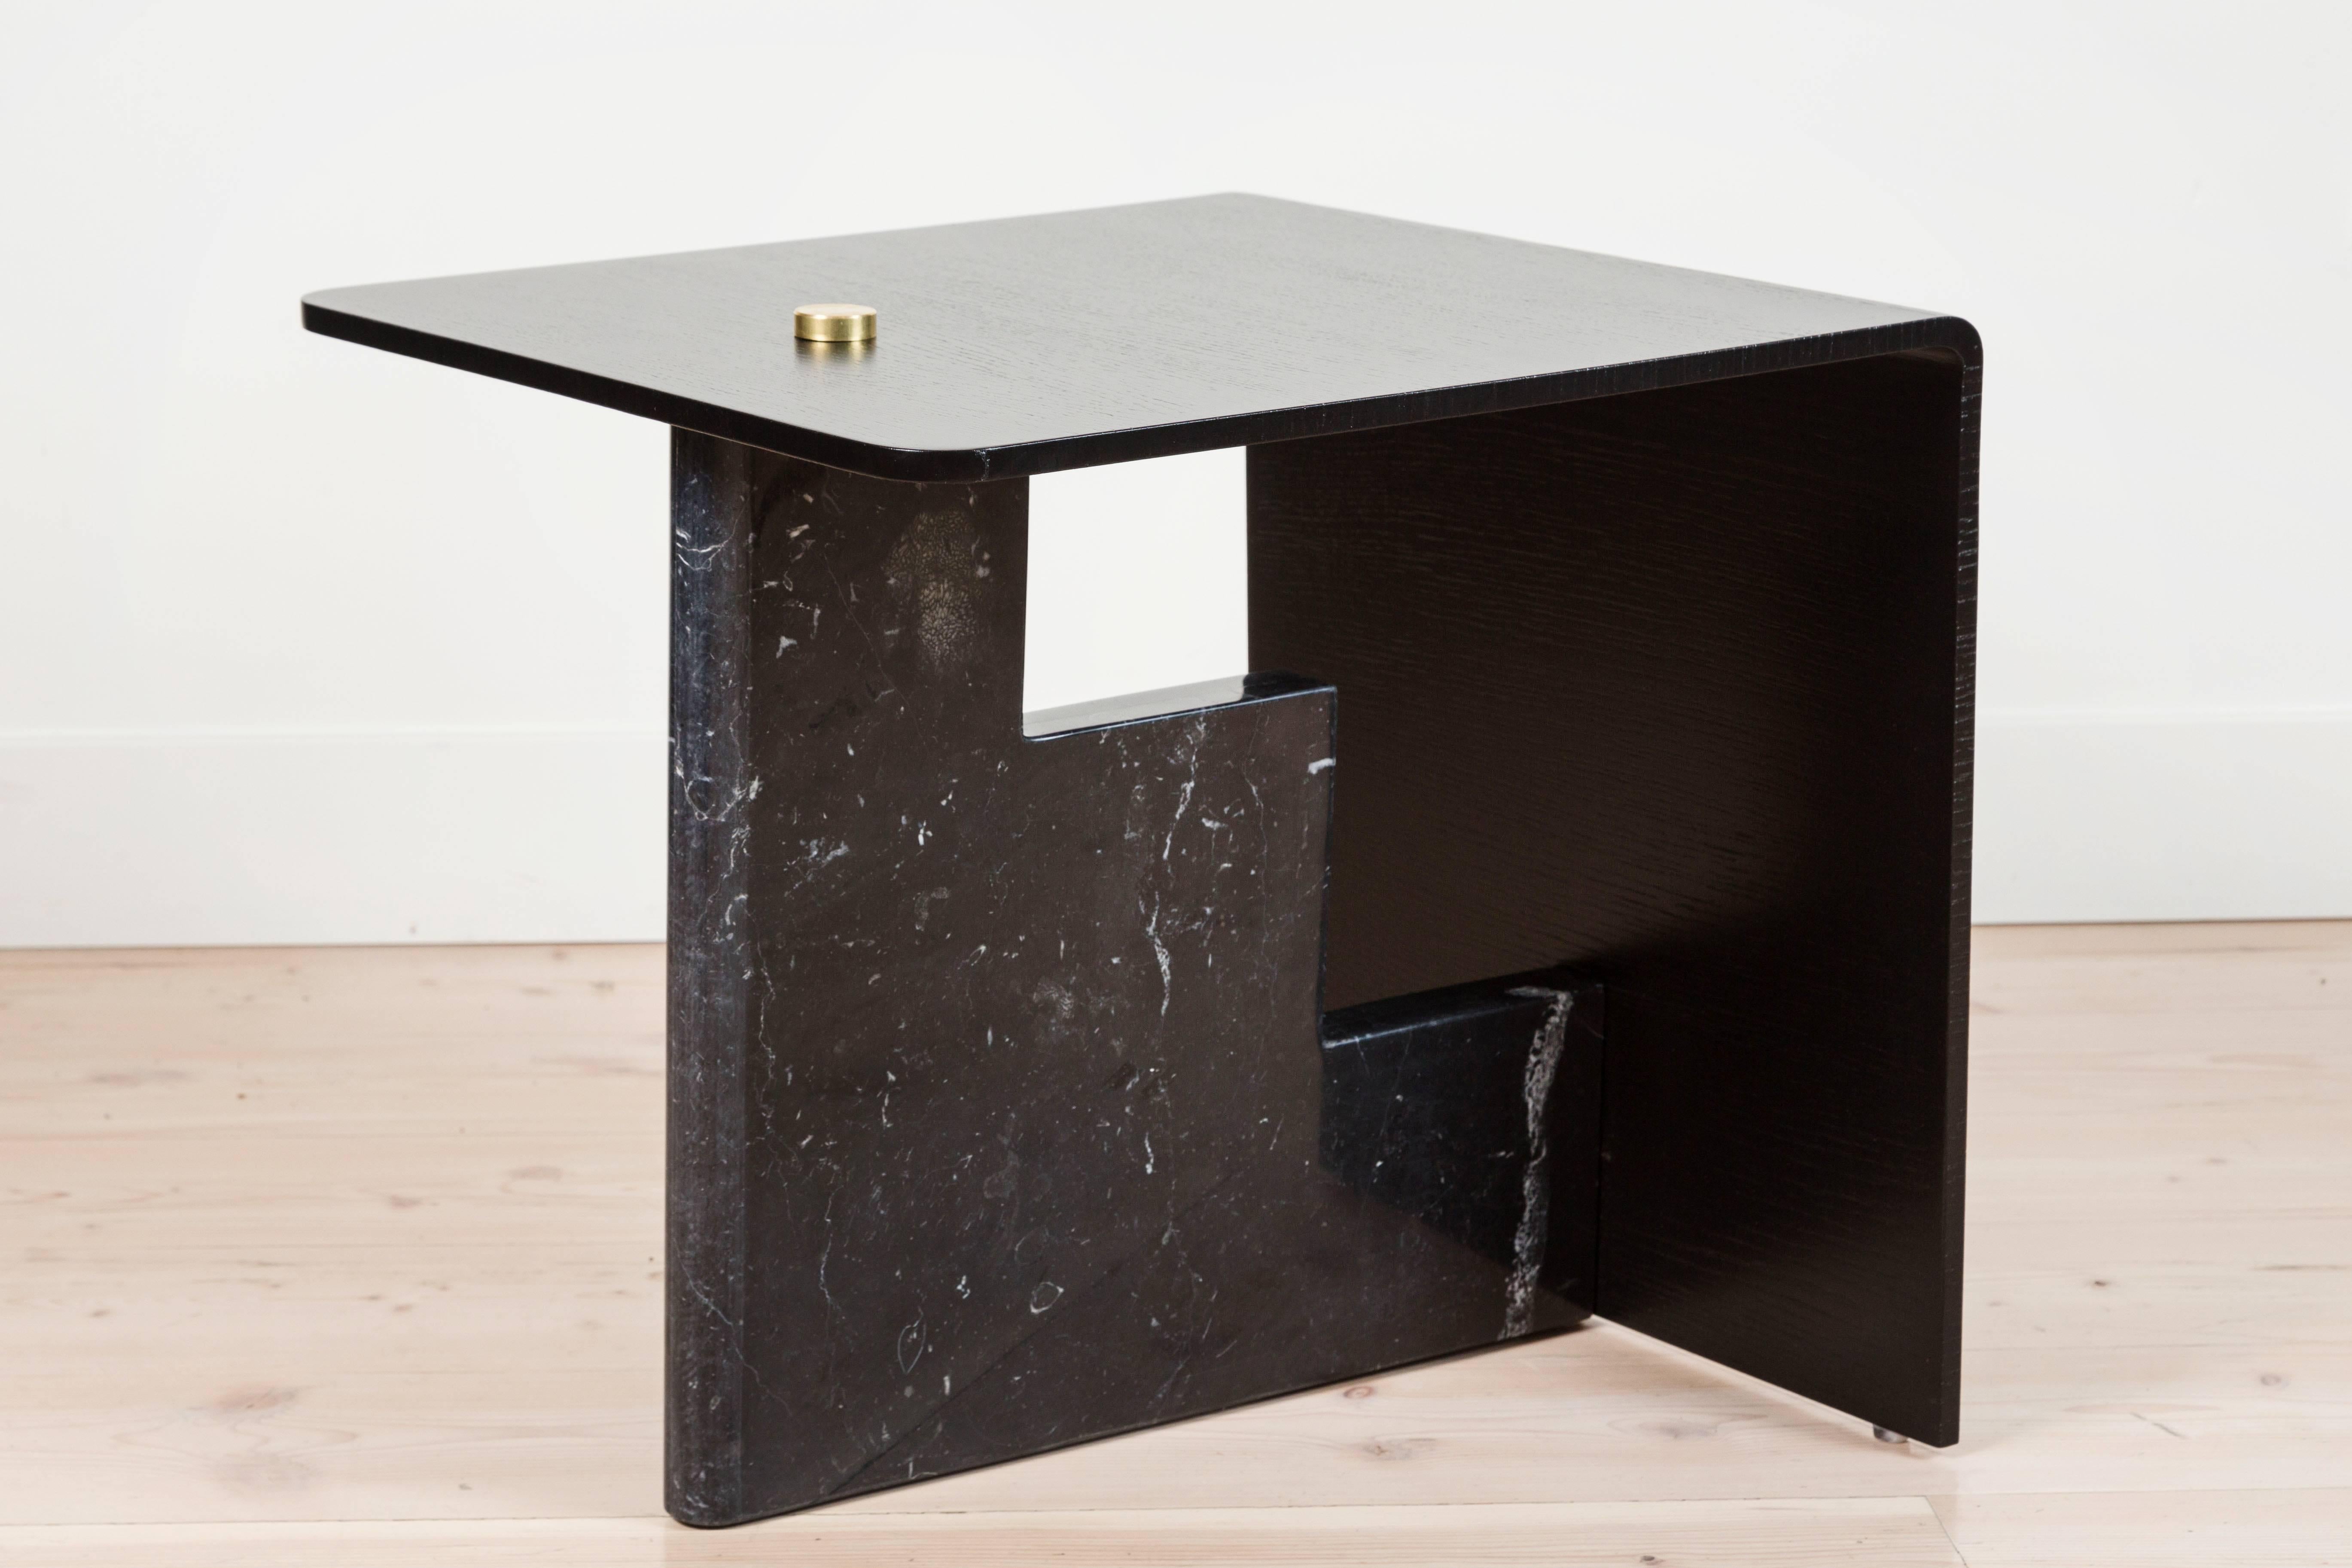 Negra Marquina Marble Huxley Side Table by Lawson-Fenning 1